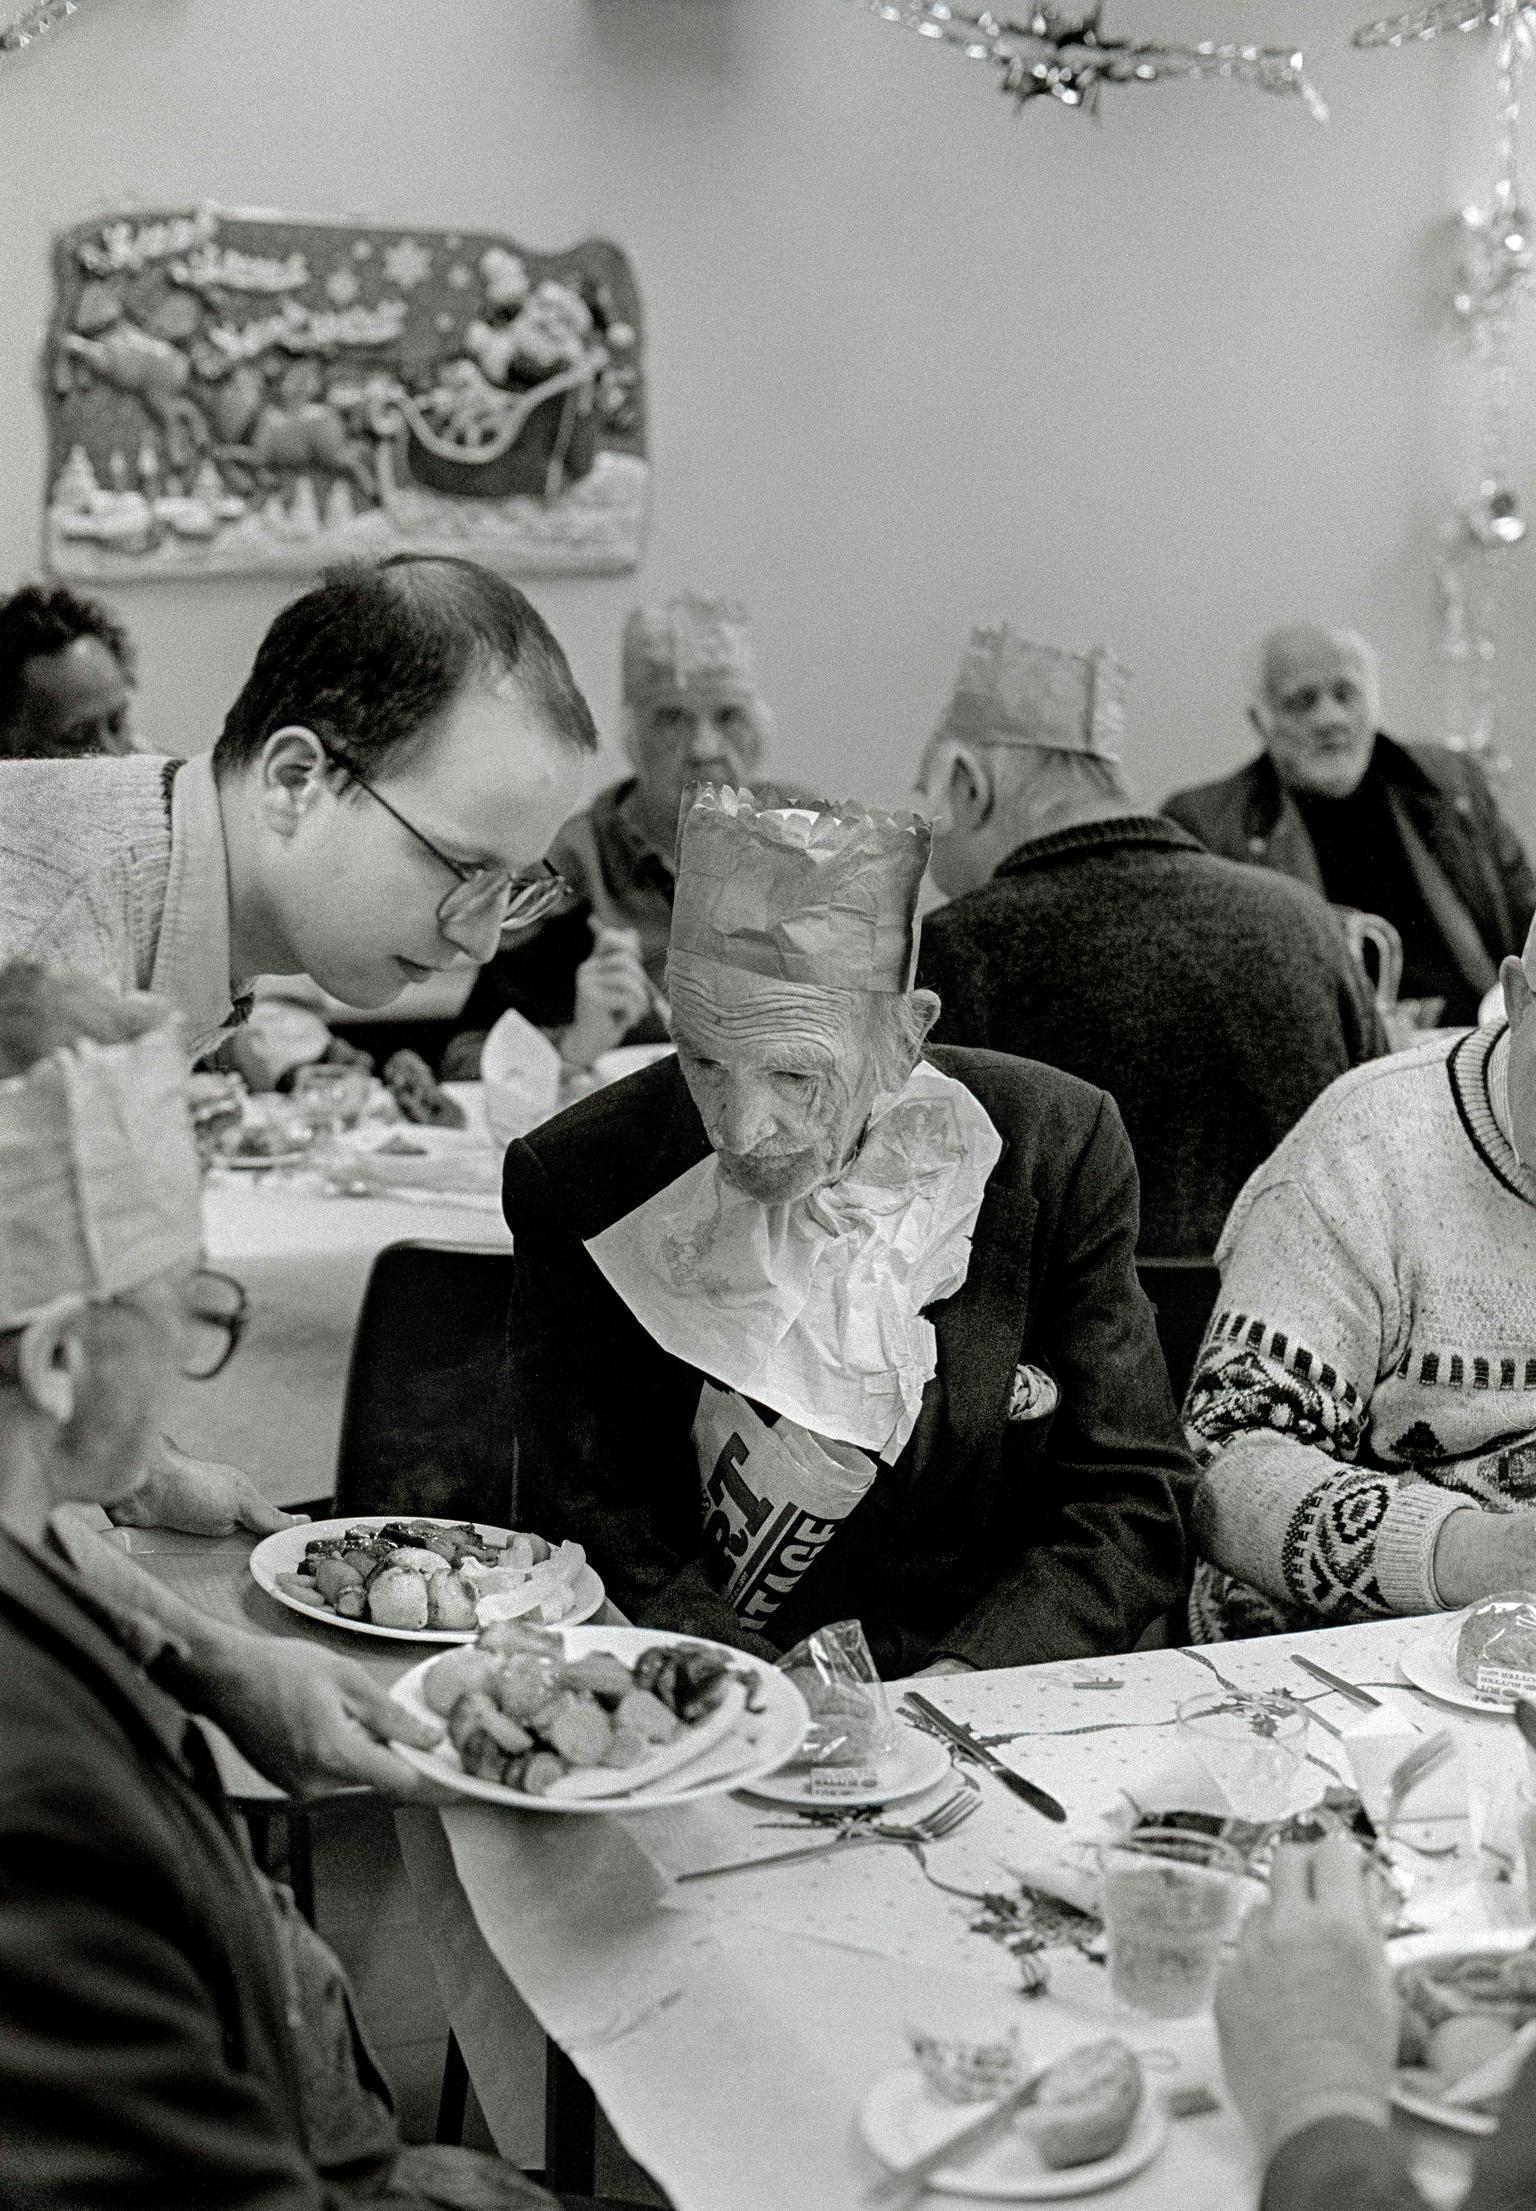 Christmas Dinner at the Salvation Army Hostel, Bute Street. Cardiff, Wales